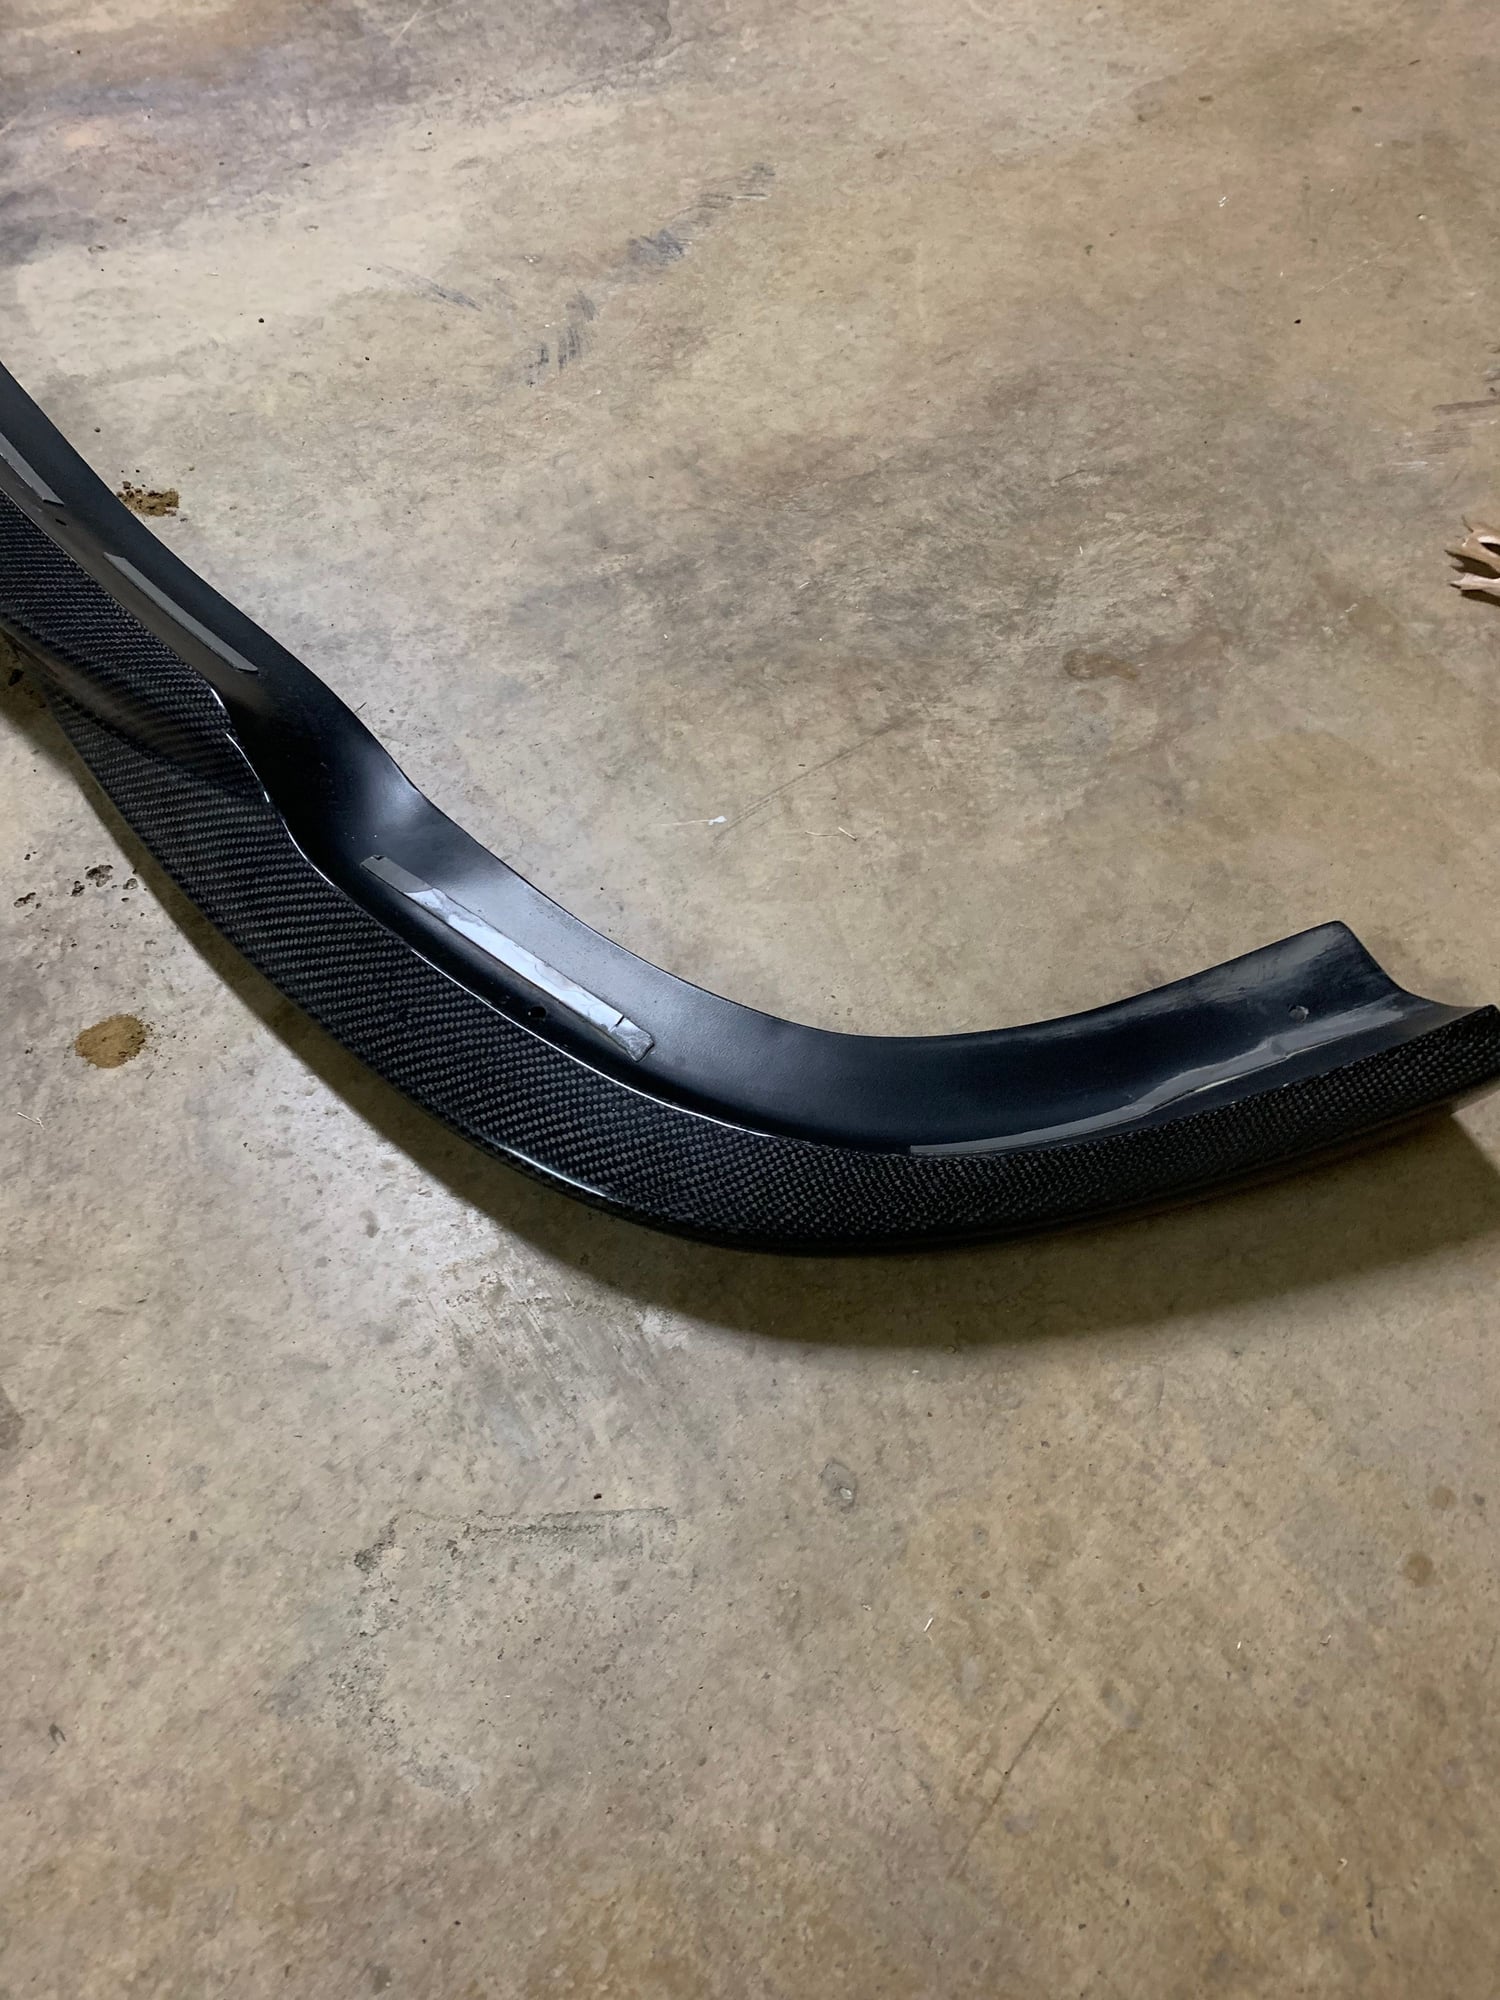 Exterior Body Parts - W204 C63 Godhand front lip - Used - 2008 to 2011 Mercedes-Benz C63 AMG - Dallas, TX 75024, United States